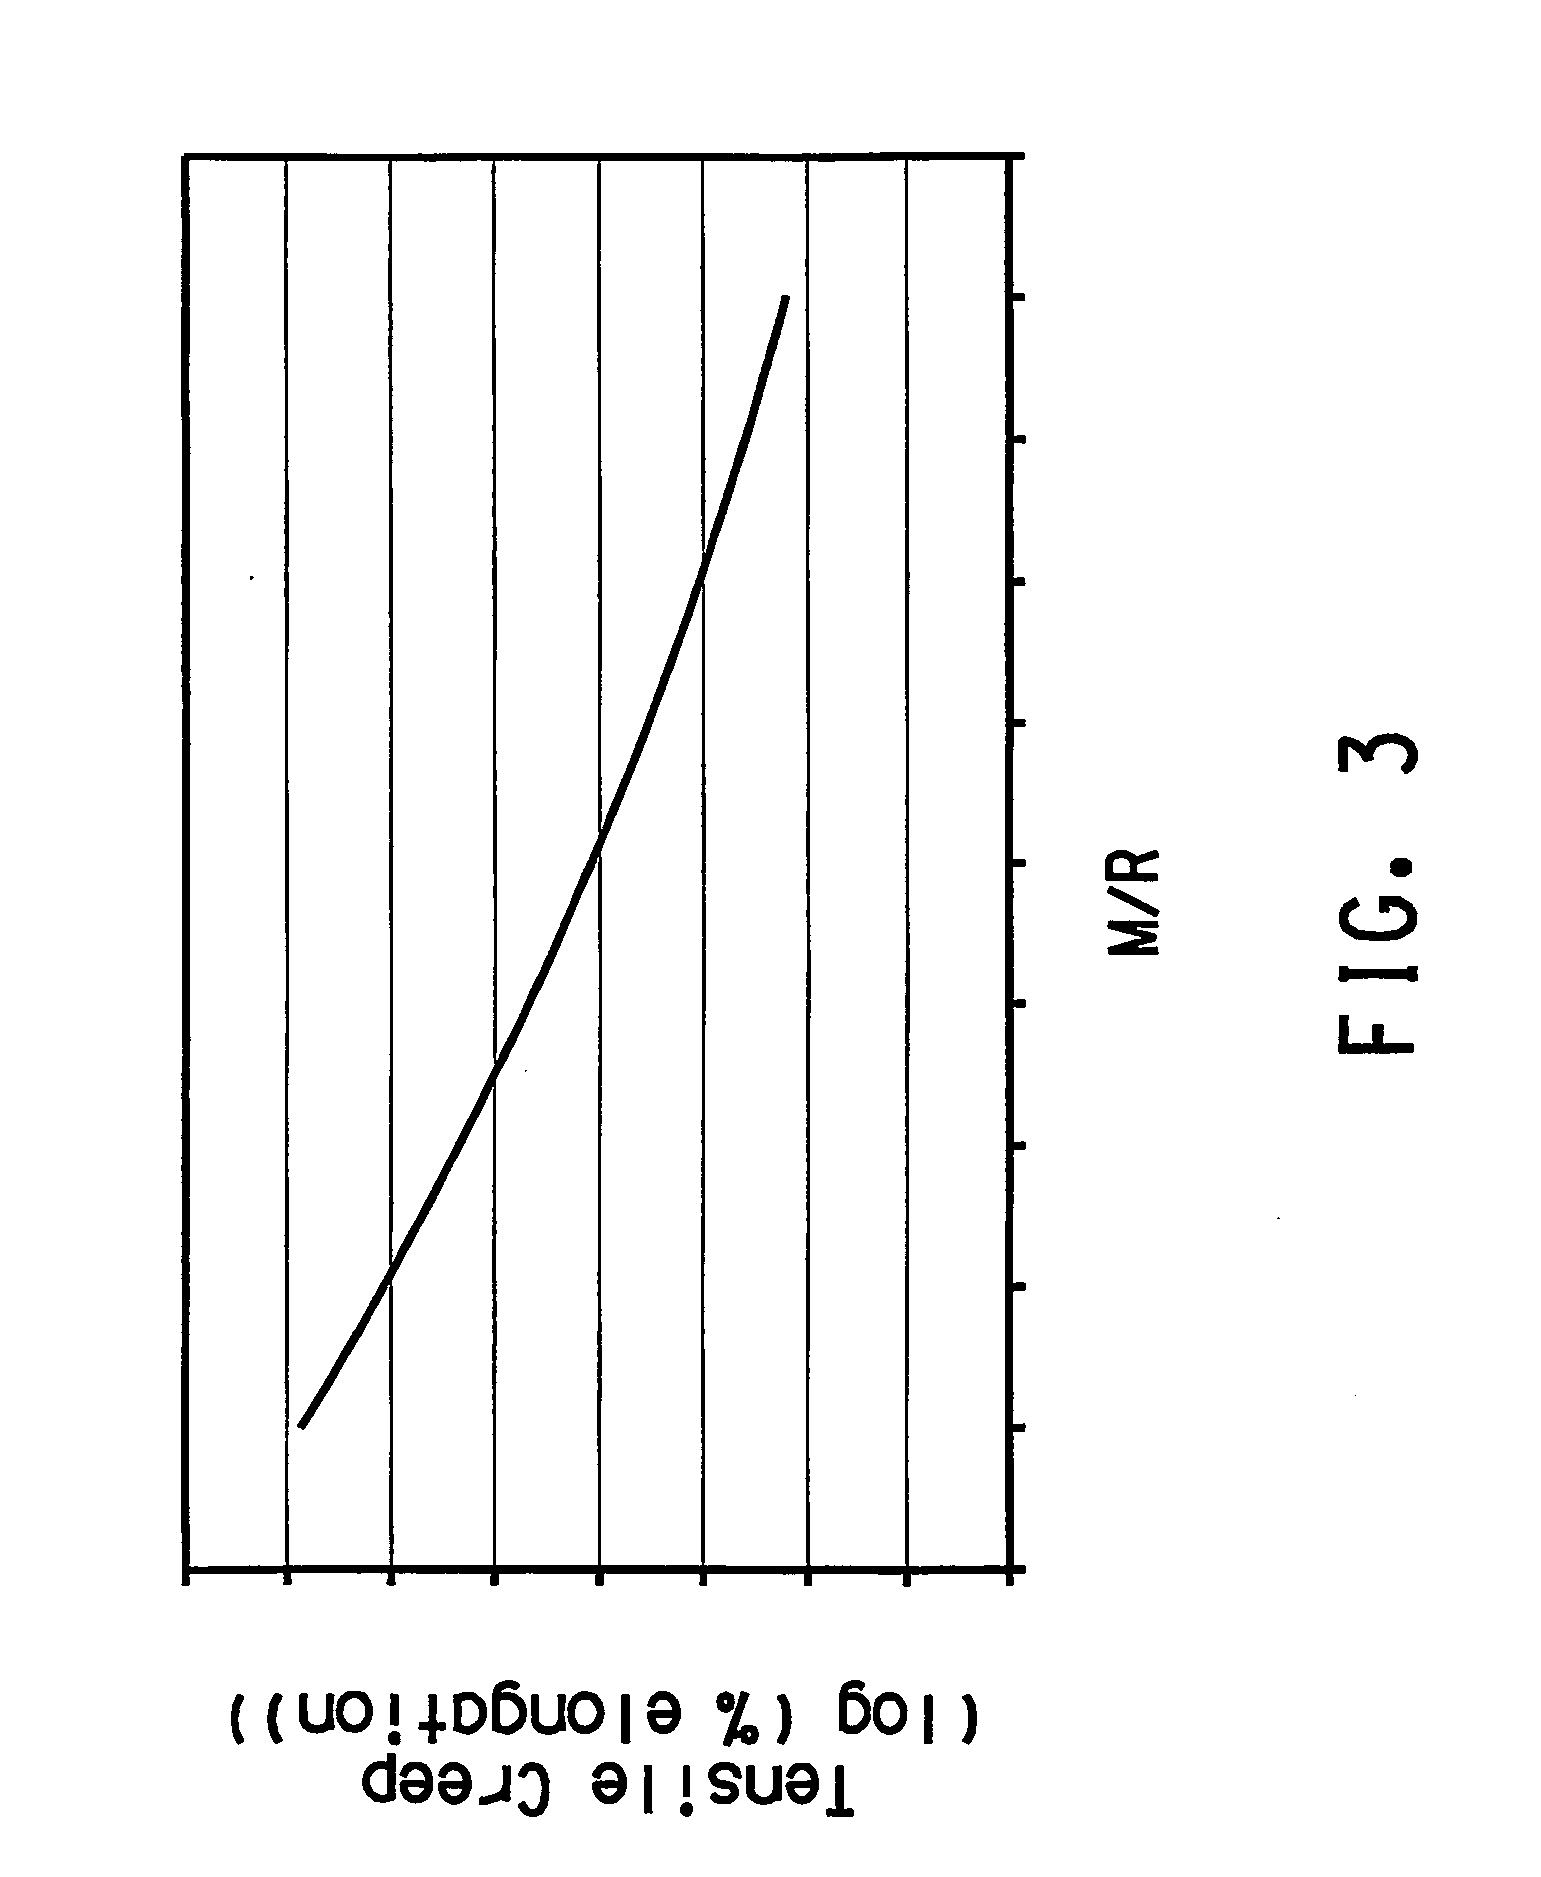 Process for controlling polyvinylbutyral physical properties by controlling stereochemistry of same